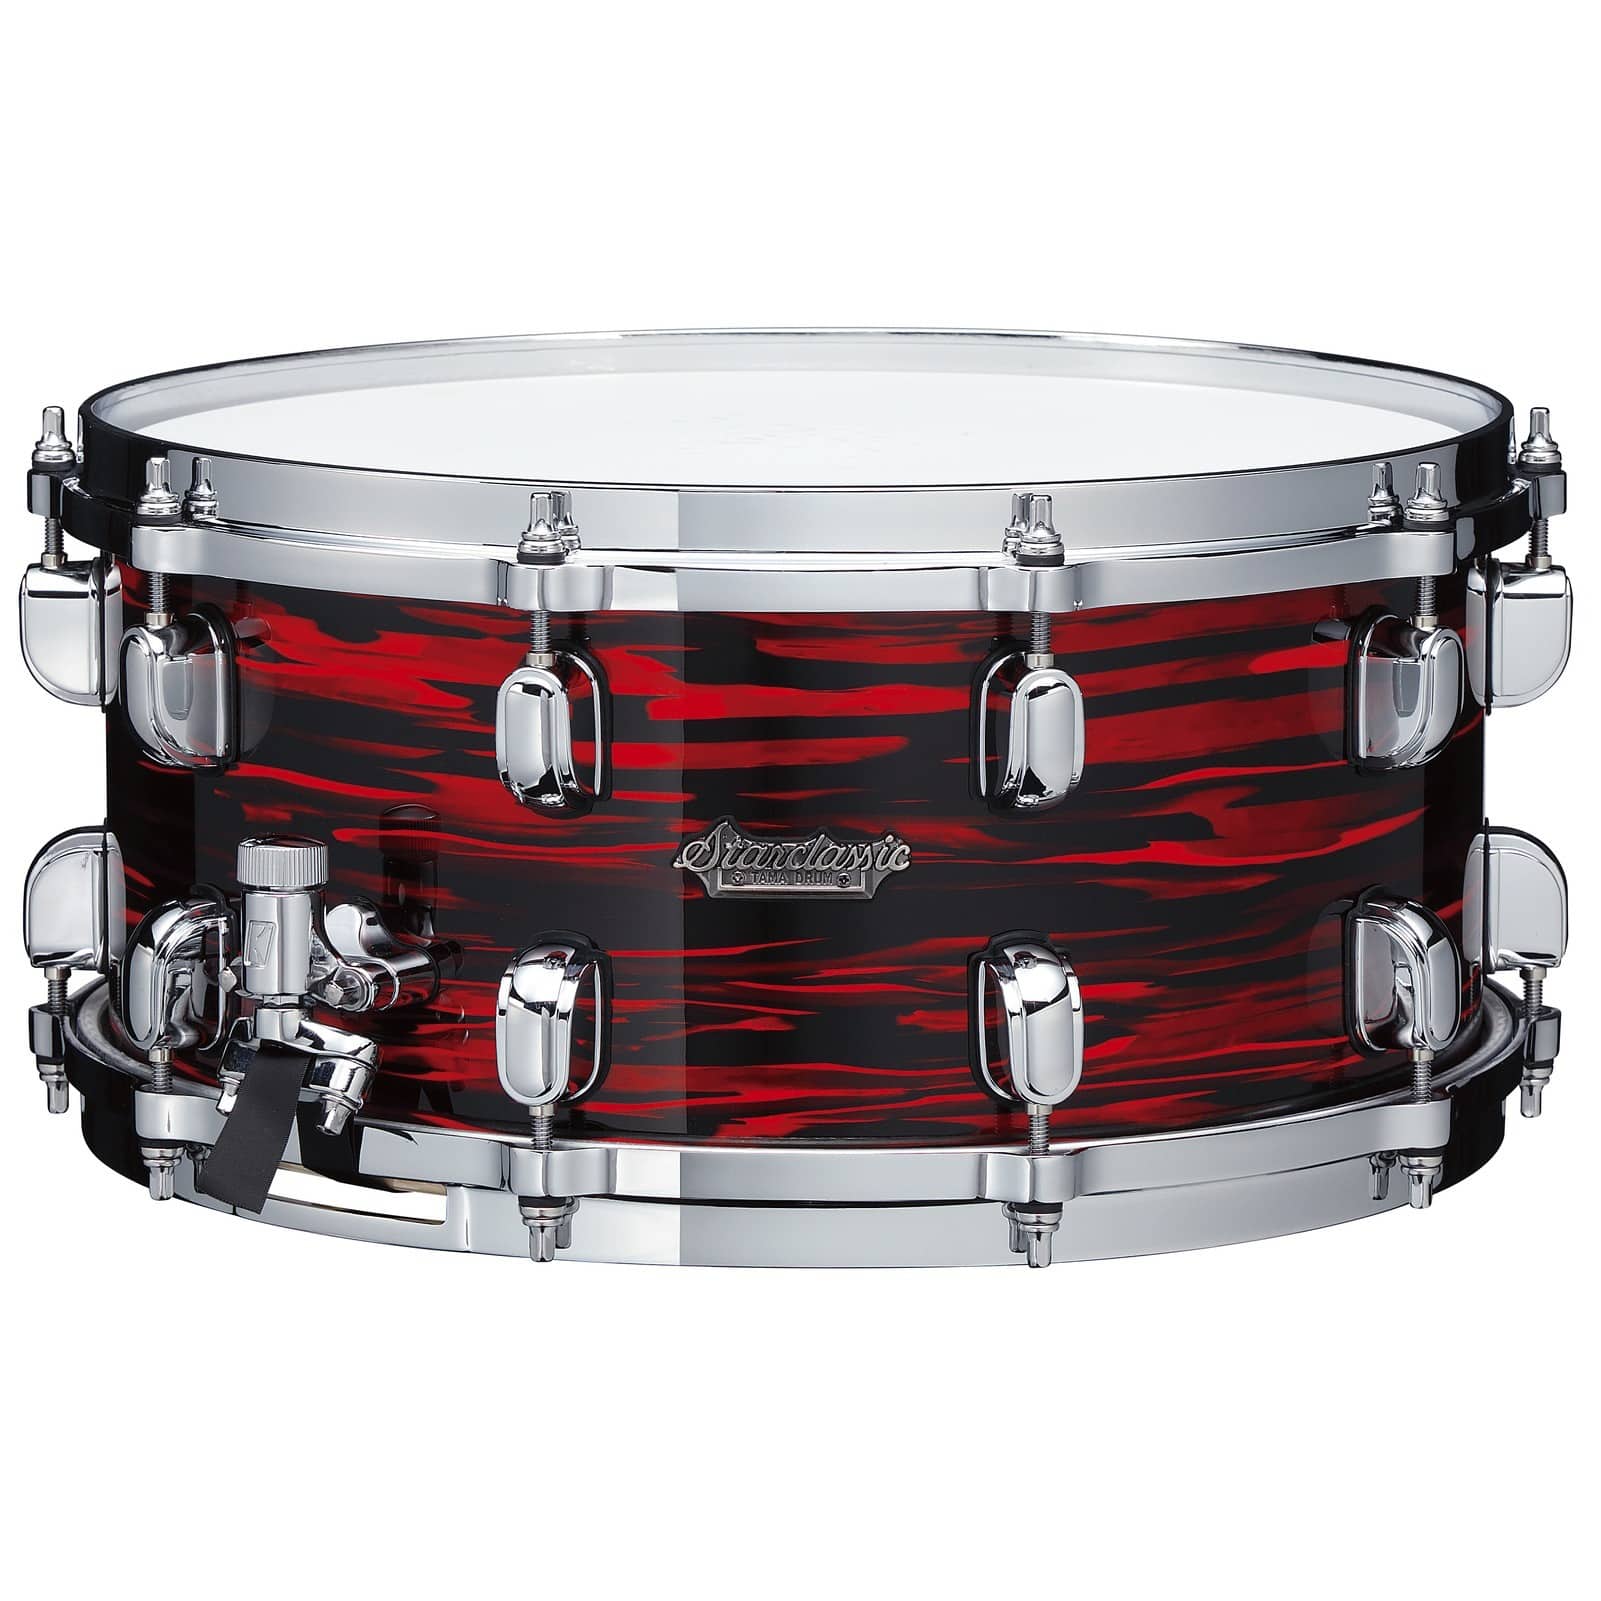 Tama MRS1465-ROY Starclassic Maple Snare Drum - 14" x 6,5" Red Oyster/Chrom HW